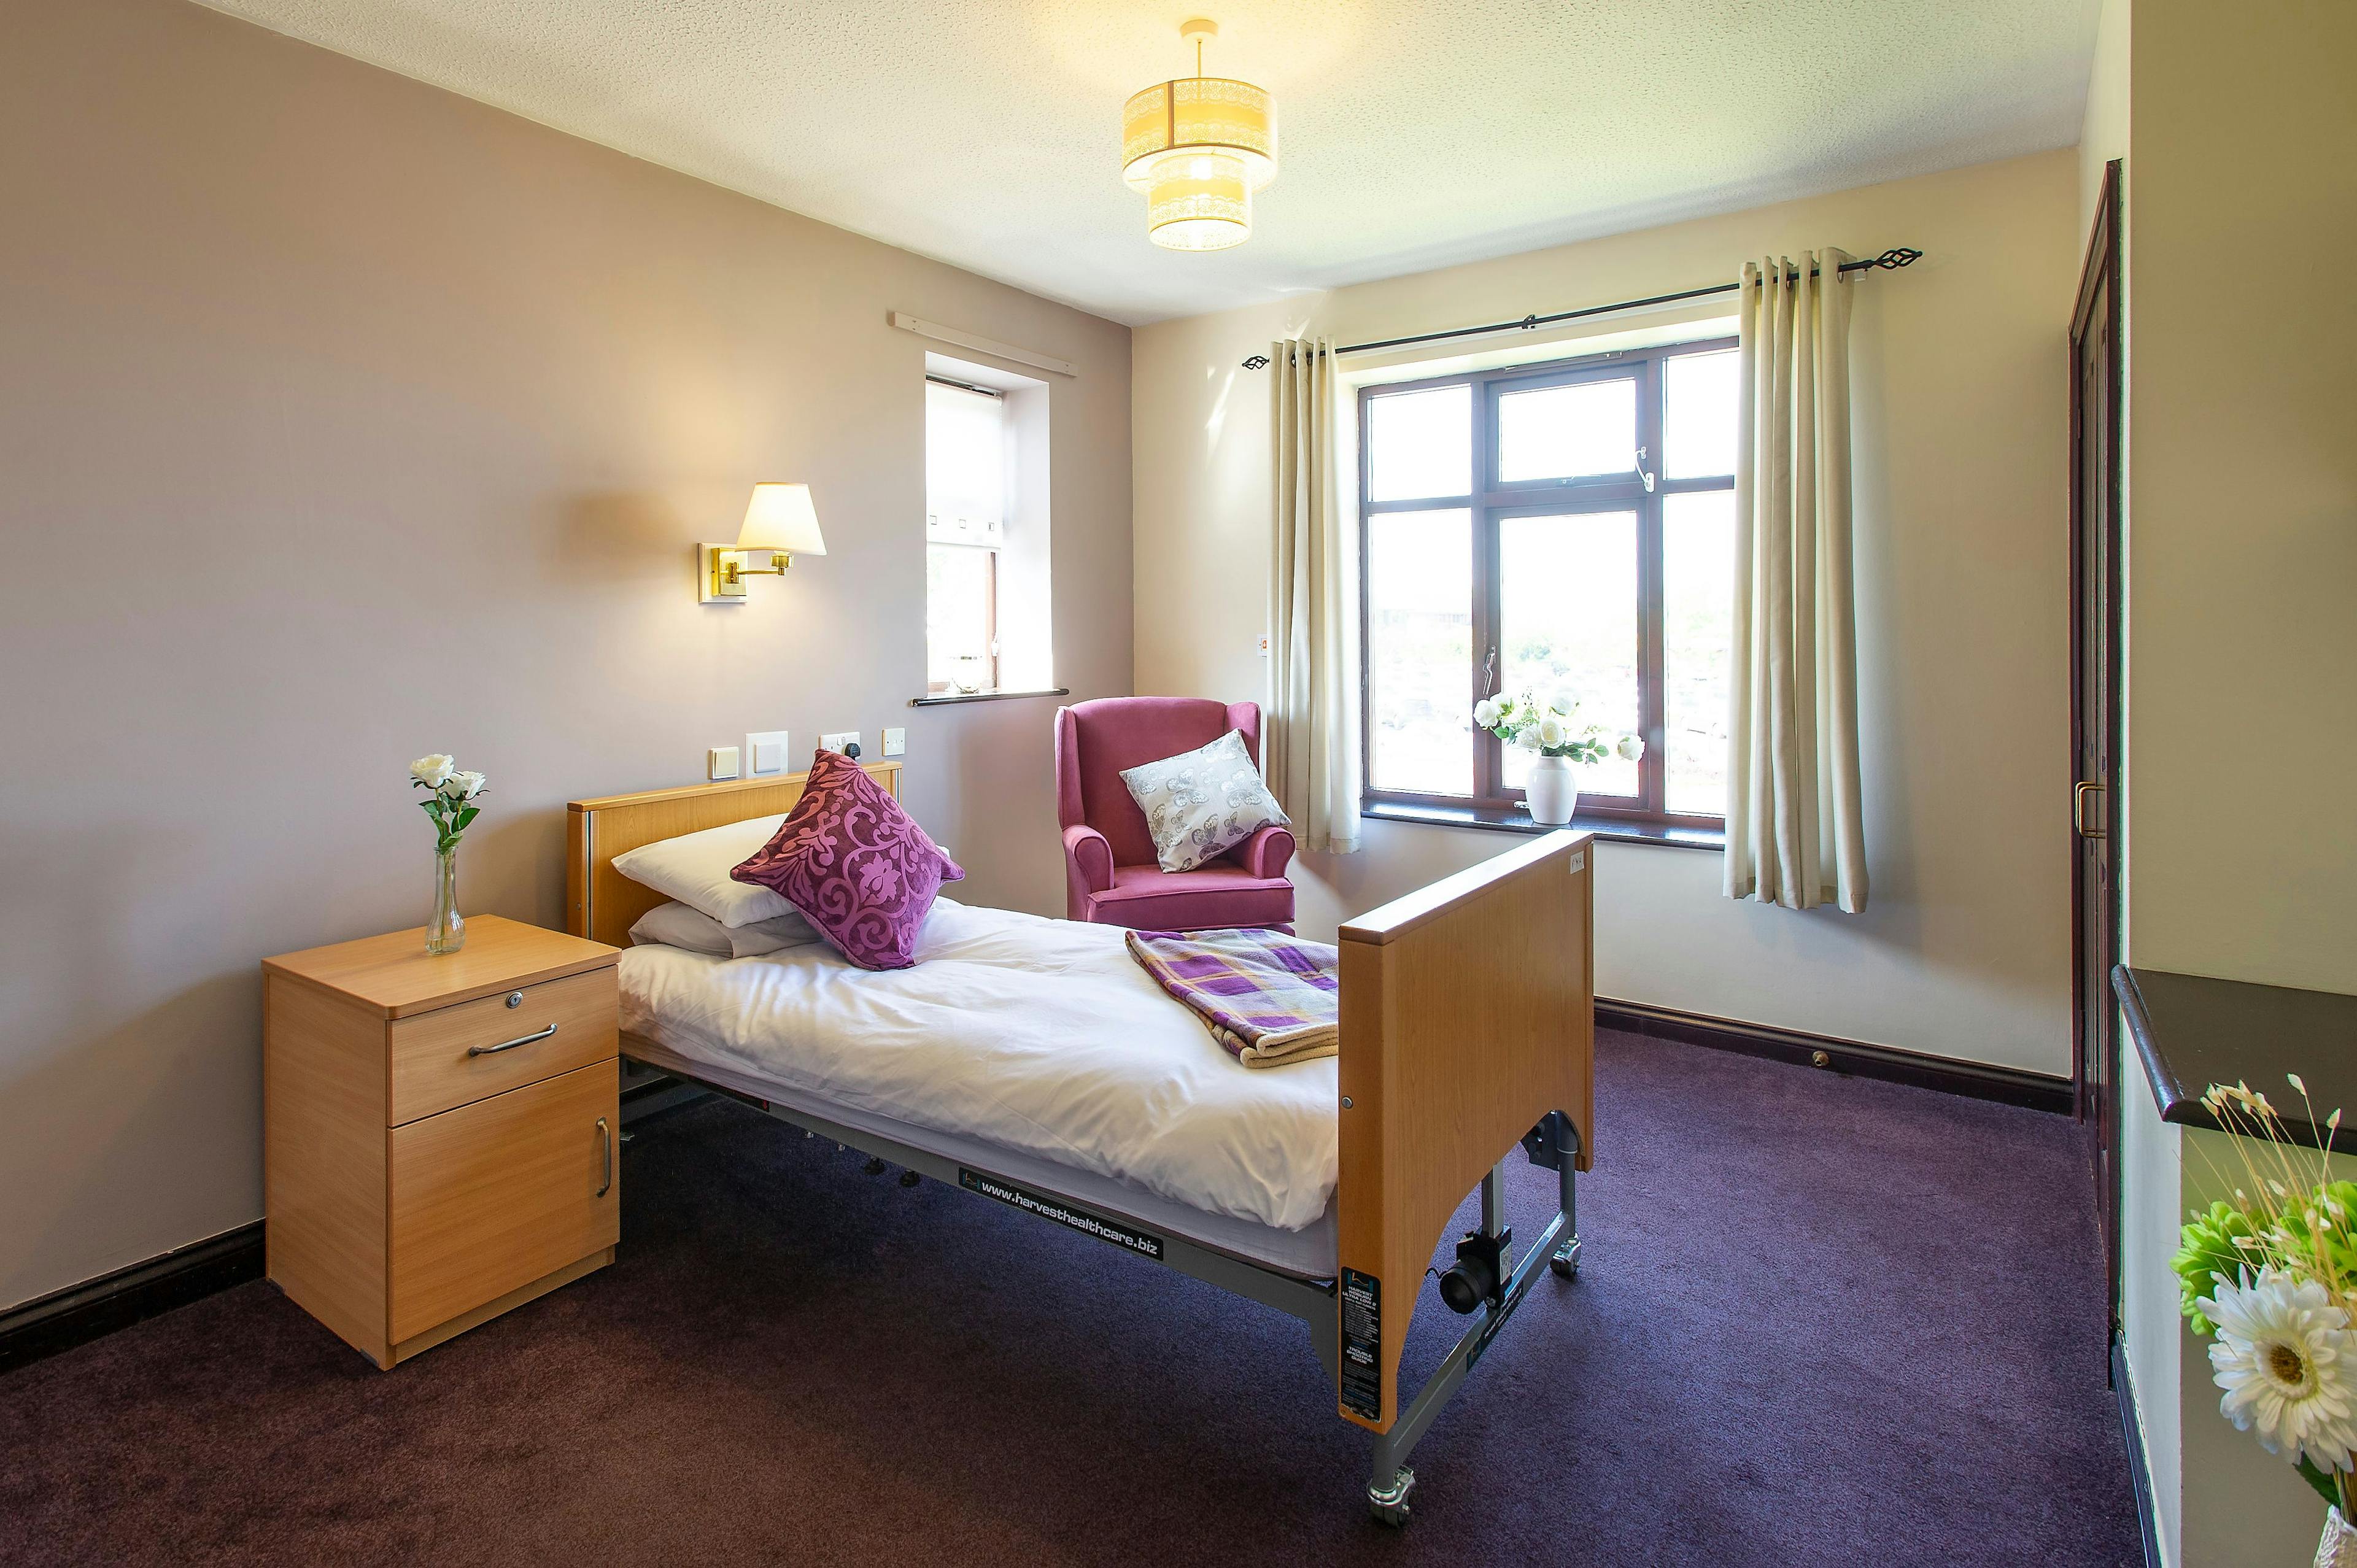 Bedroom at Dalby Court Care Home in Middlesborough, Yorkshire